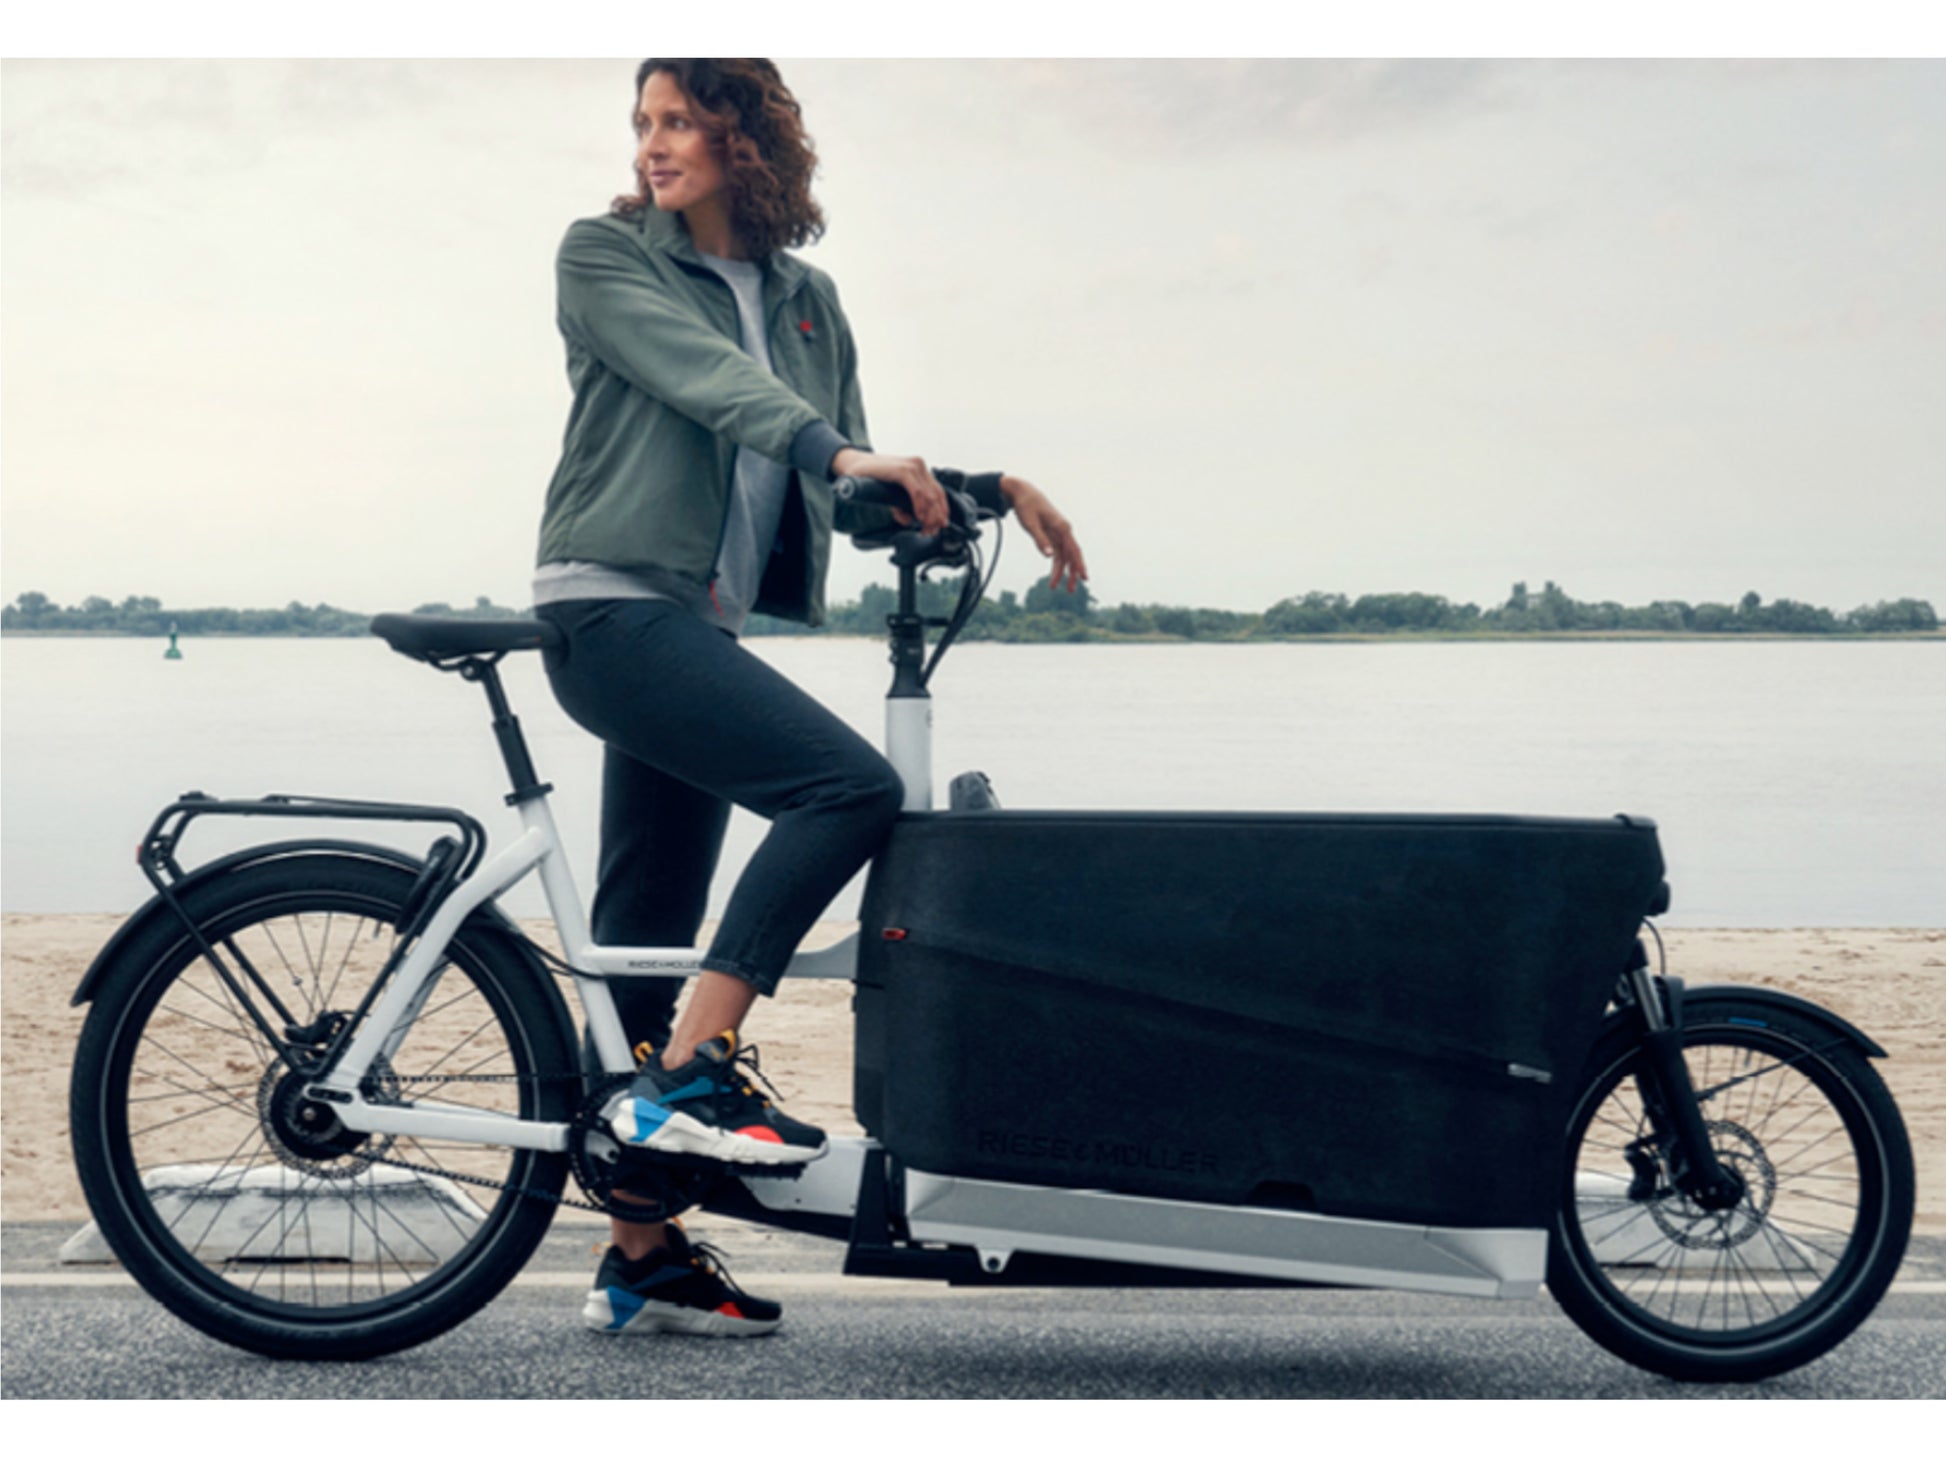 Riese & Muller Packster 70 Family cargo eMTB hardtail woman standing with bike by waterfront